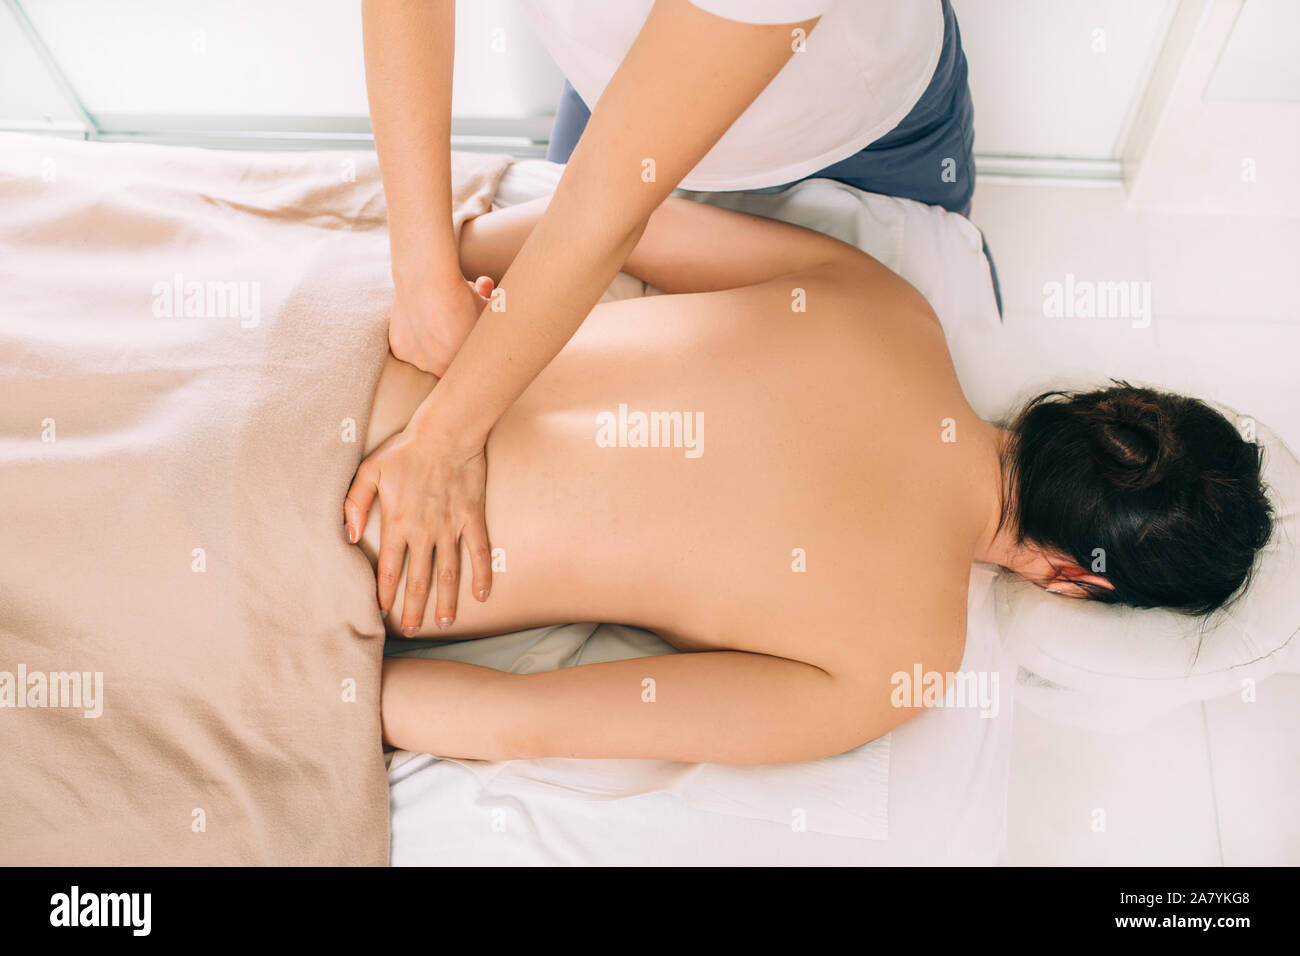 Overhead view of woman receiving back massage from therapist in